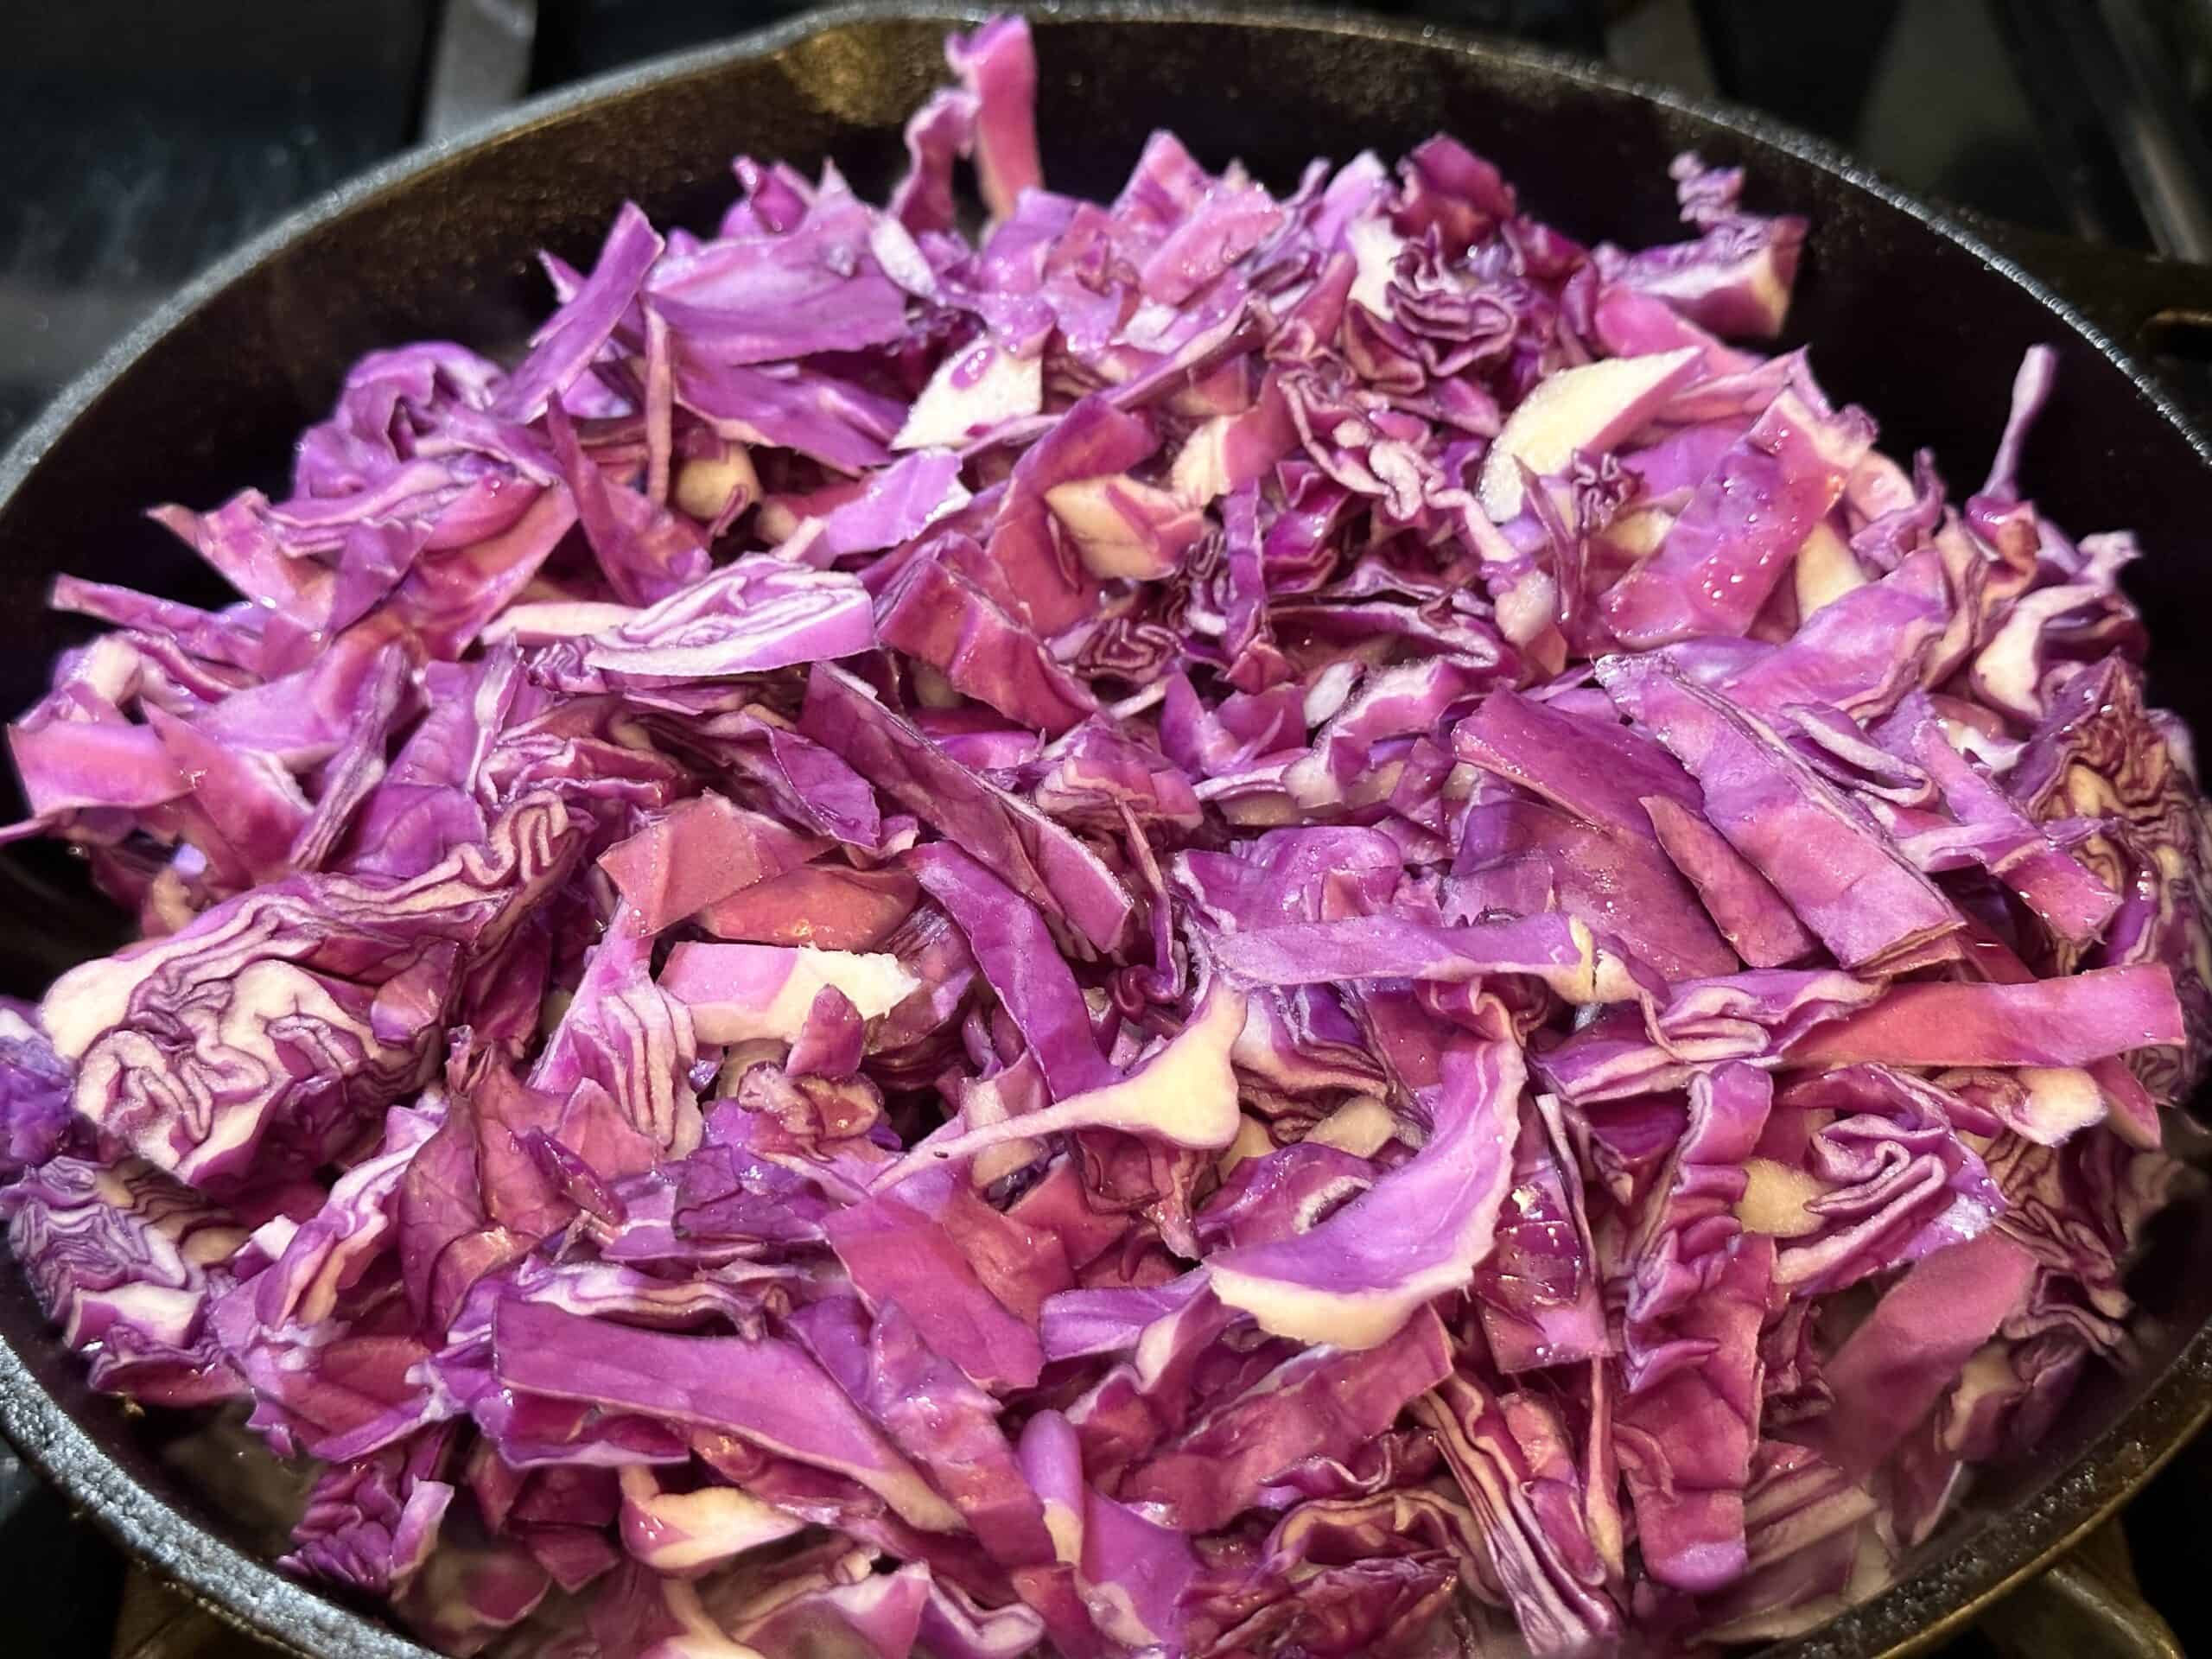 chopped red cabbage is added to the skillet.